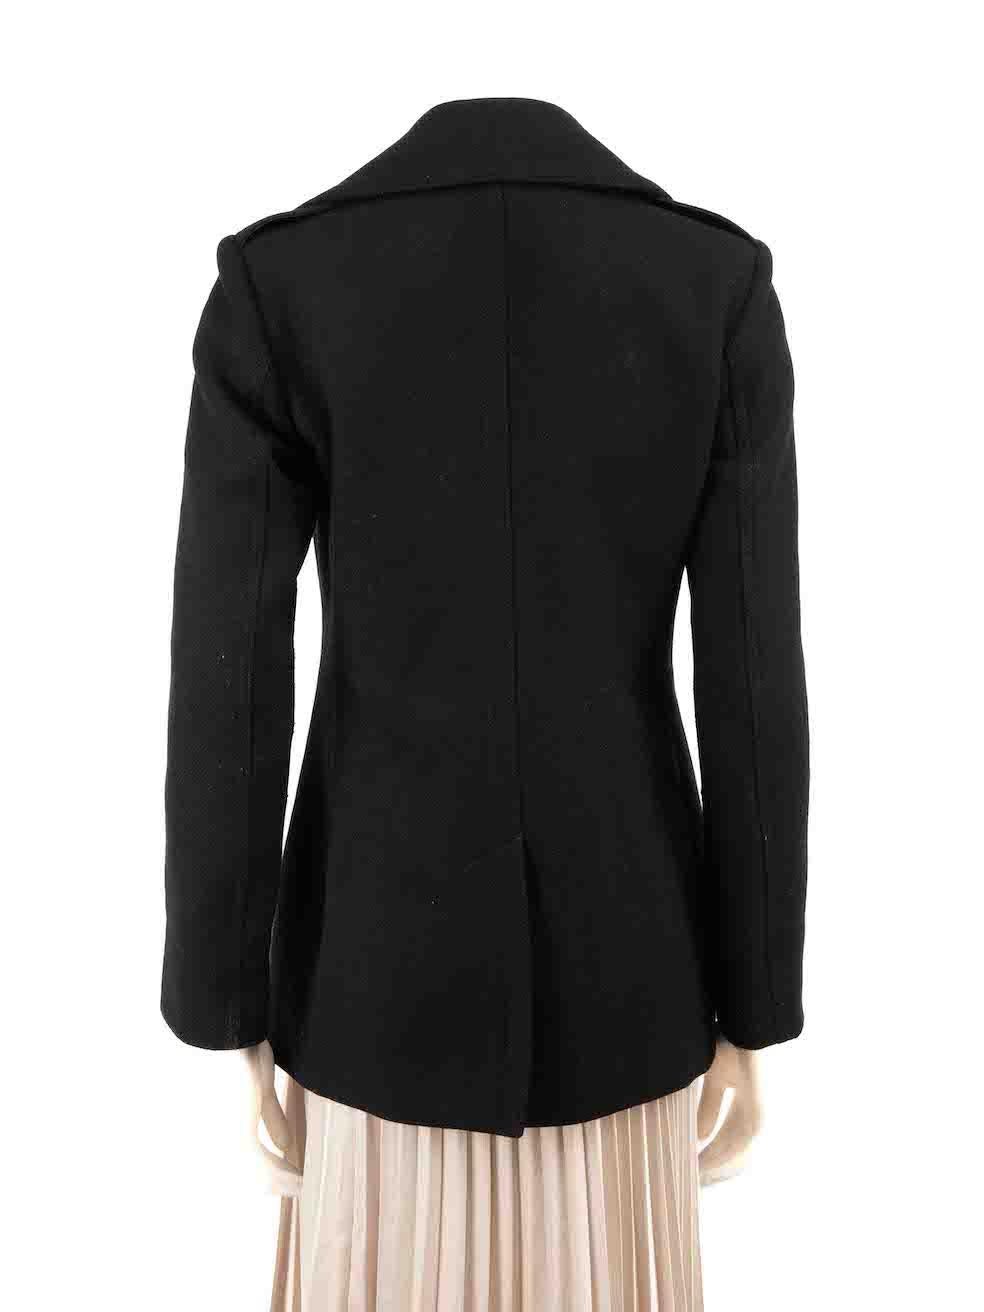 Burberry Burberry Brit Black Wool Double Breast Coat Size XS In Good Condition For Sale In London, GB